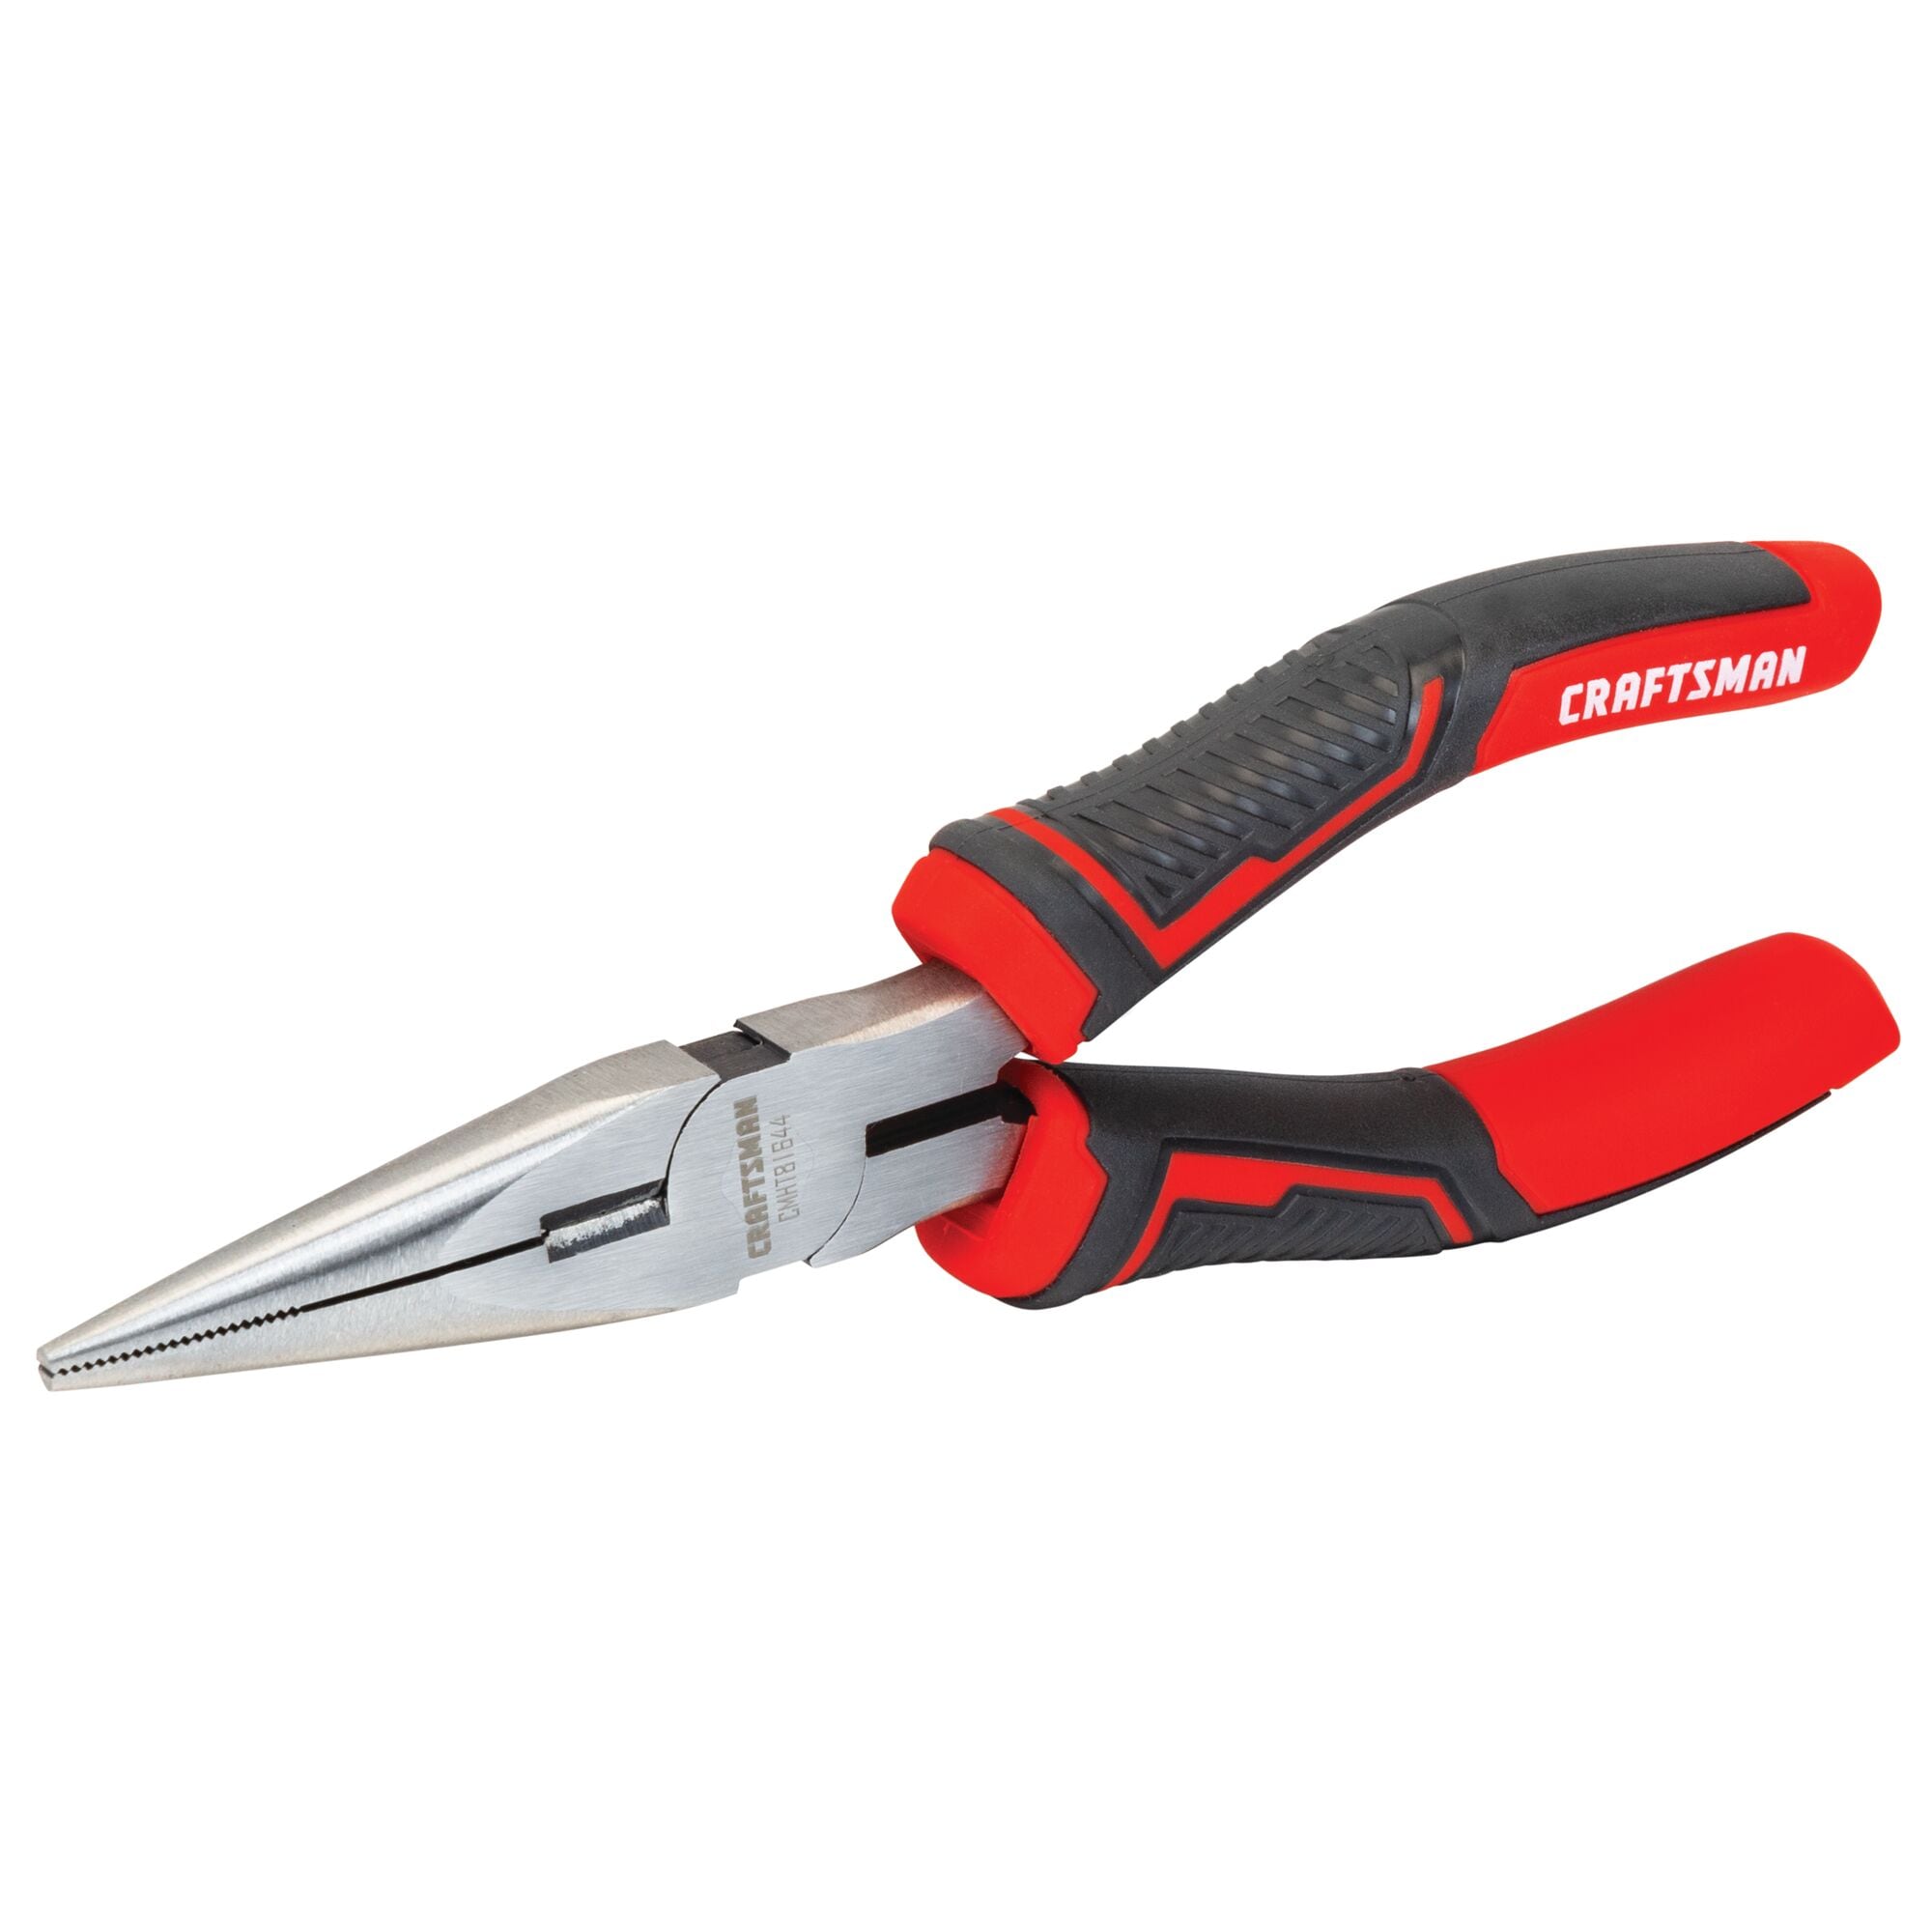 CRAFTSMAN 6-in Electrical Cutting Pliers